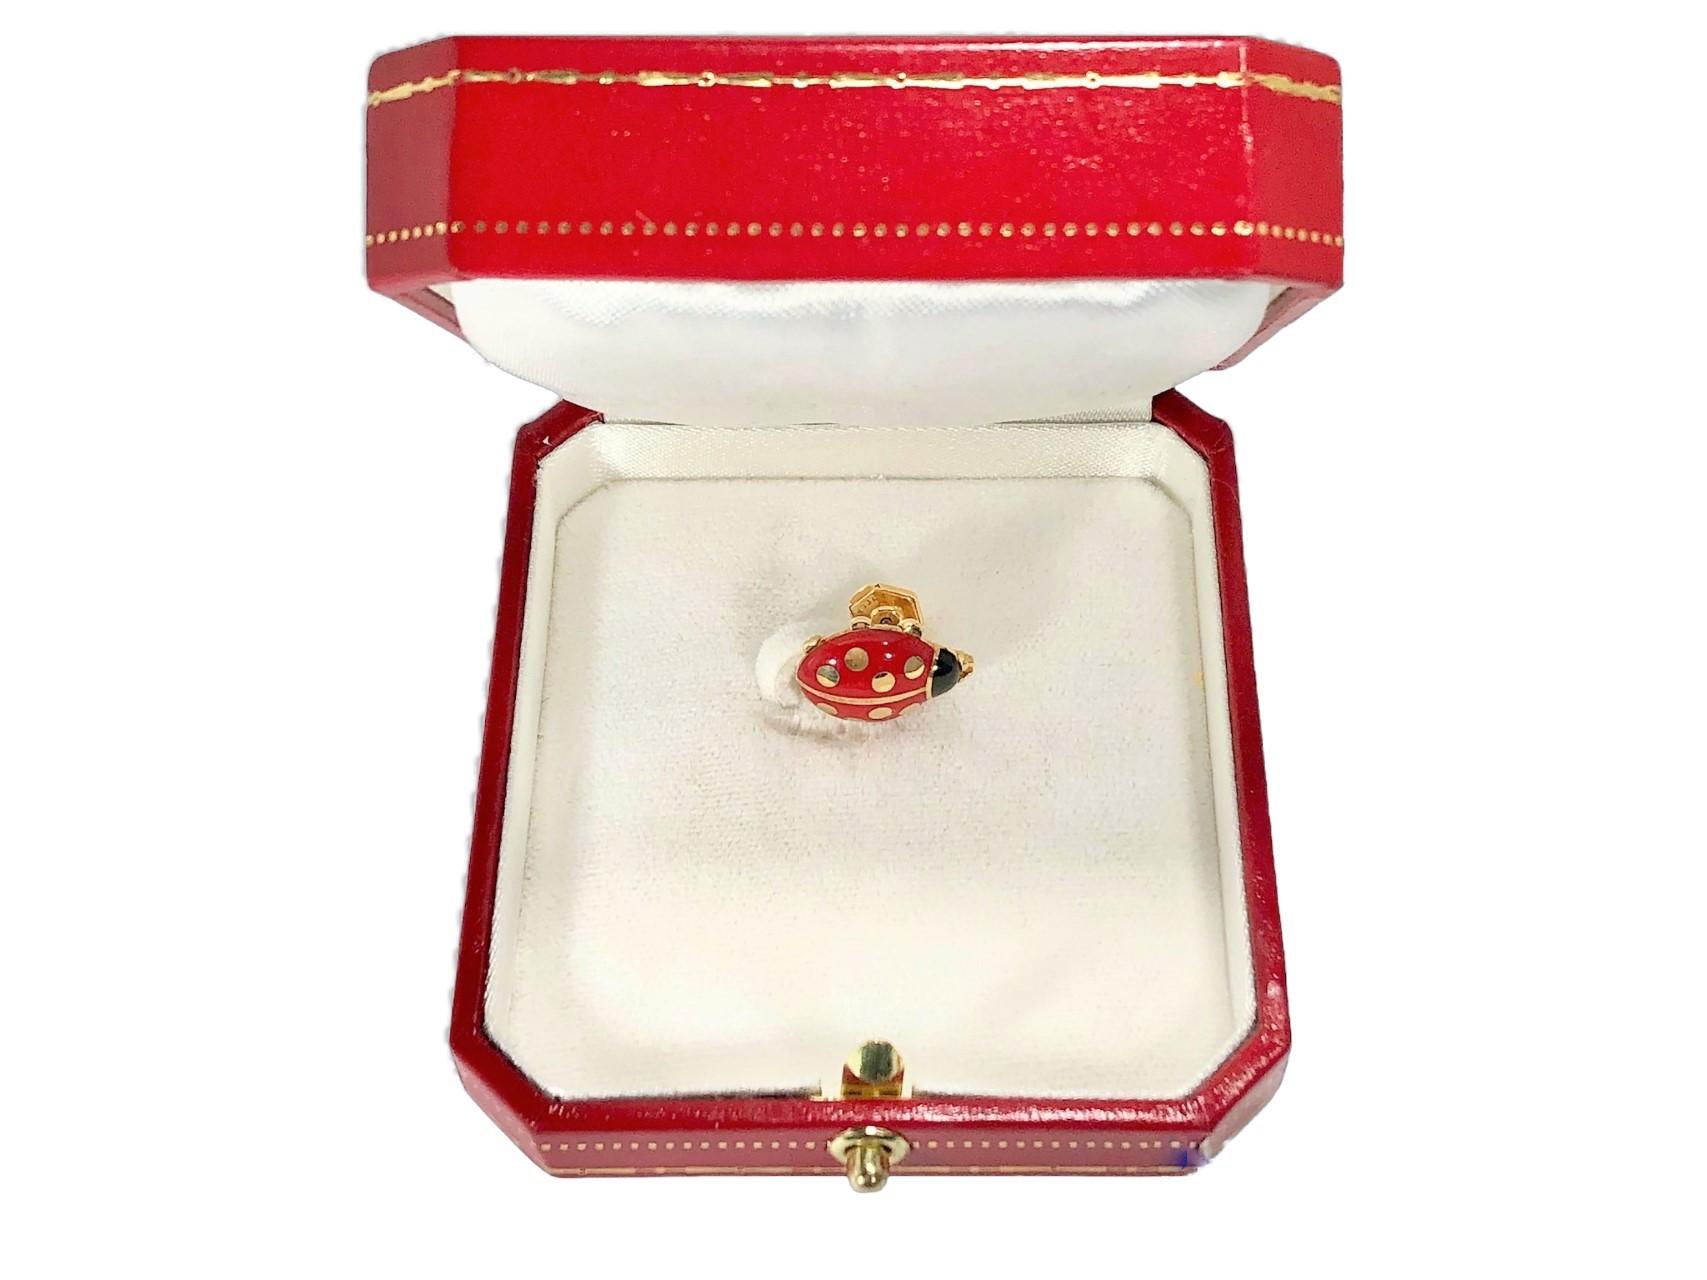 Cartier Vintage 18K Gold and Enamel Lady Bug Lapel Pin 1